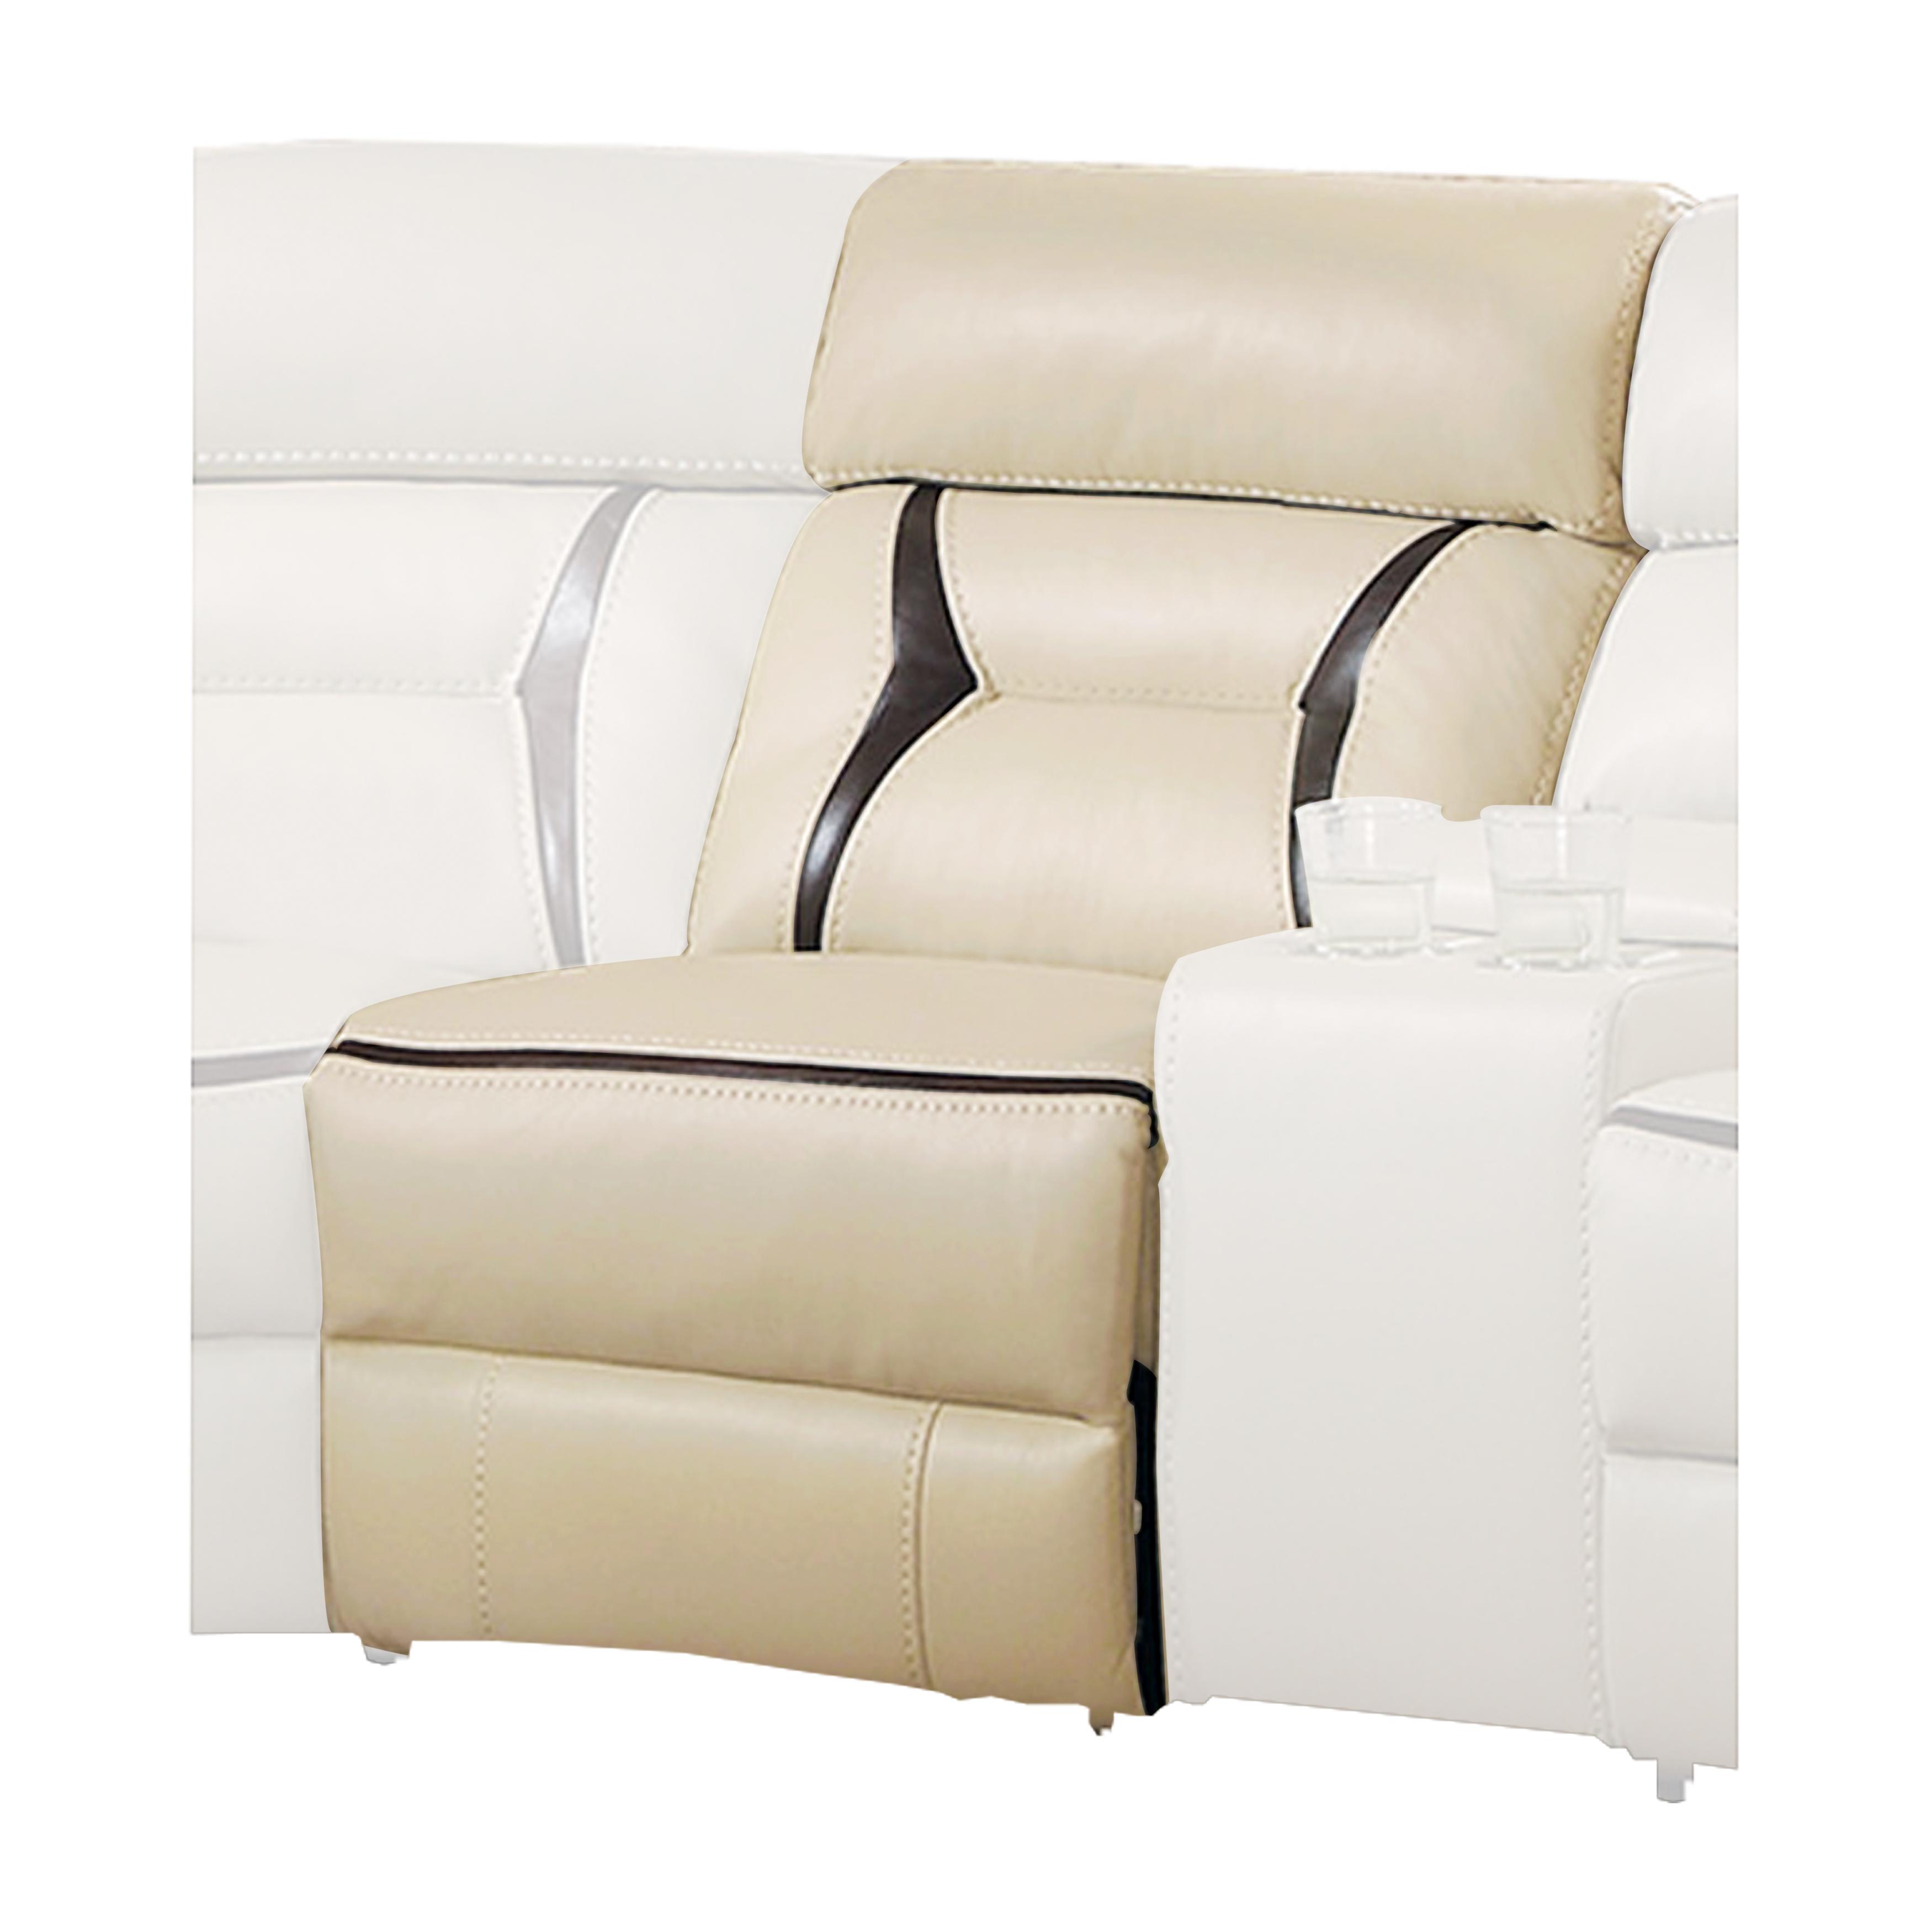 Modern Power Armless Reclining Chair 8229-ARPW Amite 8229-ARPW in Beige Faux Leather